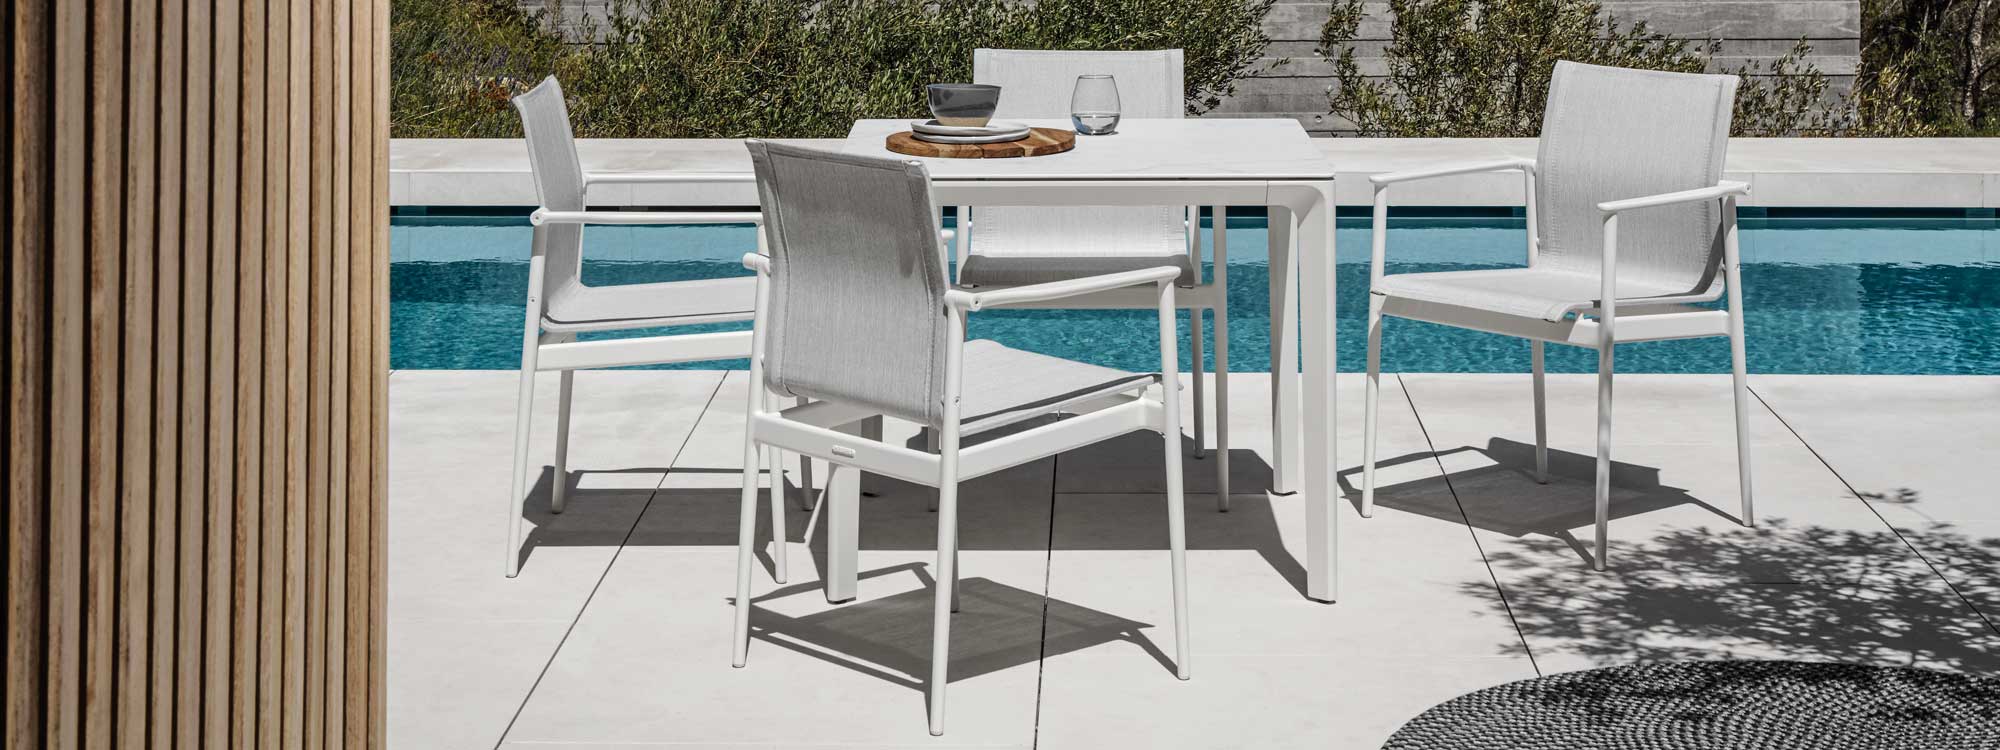 Image of Gloster 180 garden chairs and Carver square garden table with ceramic top, shown on sunny poolside